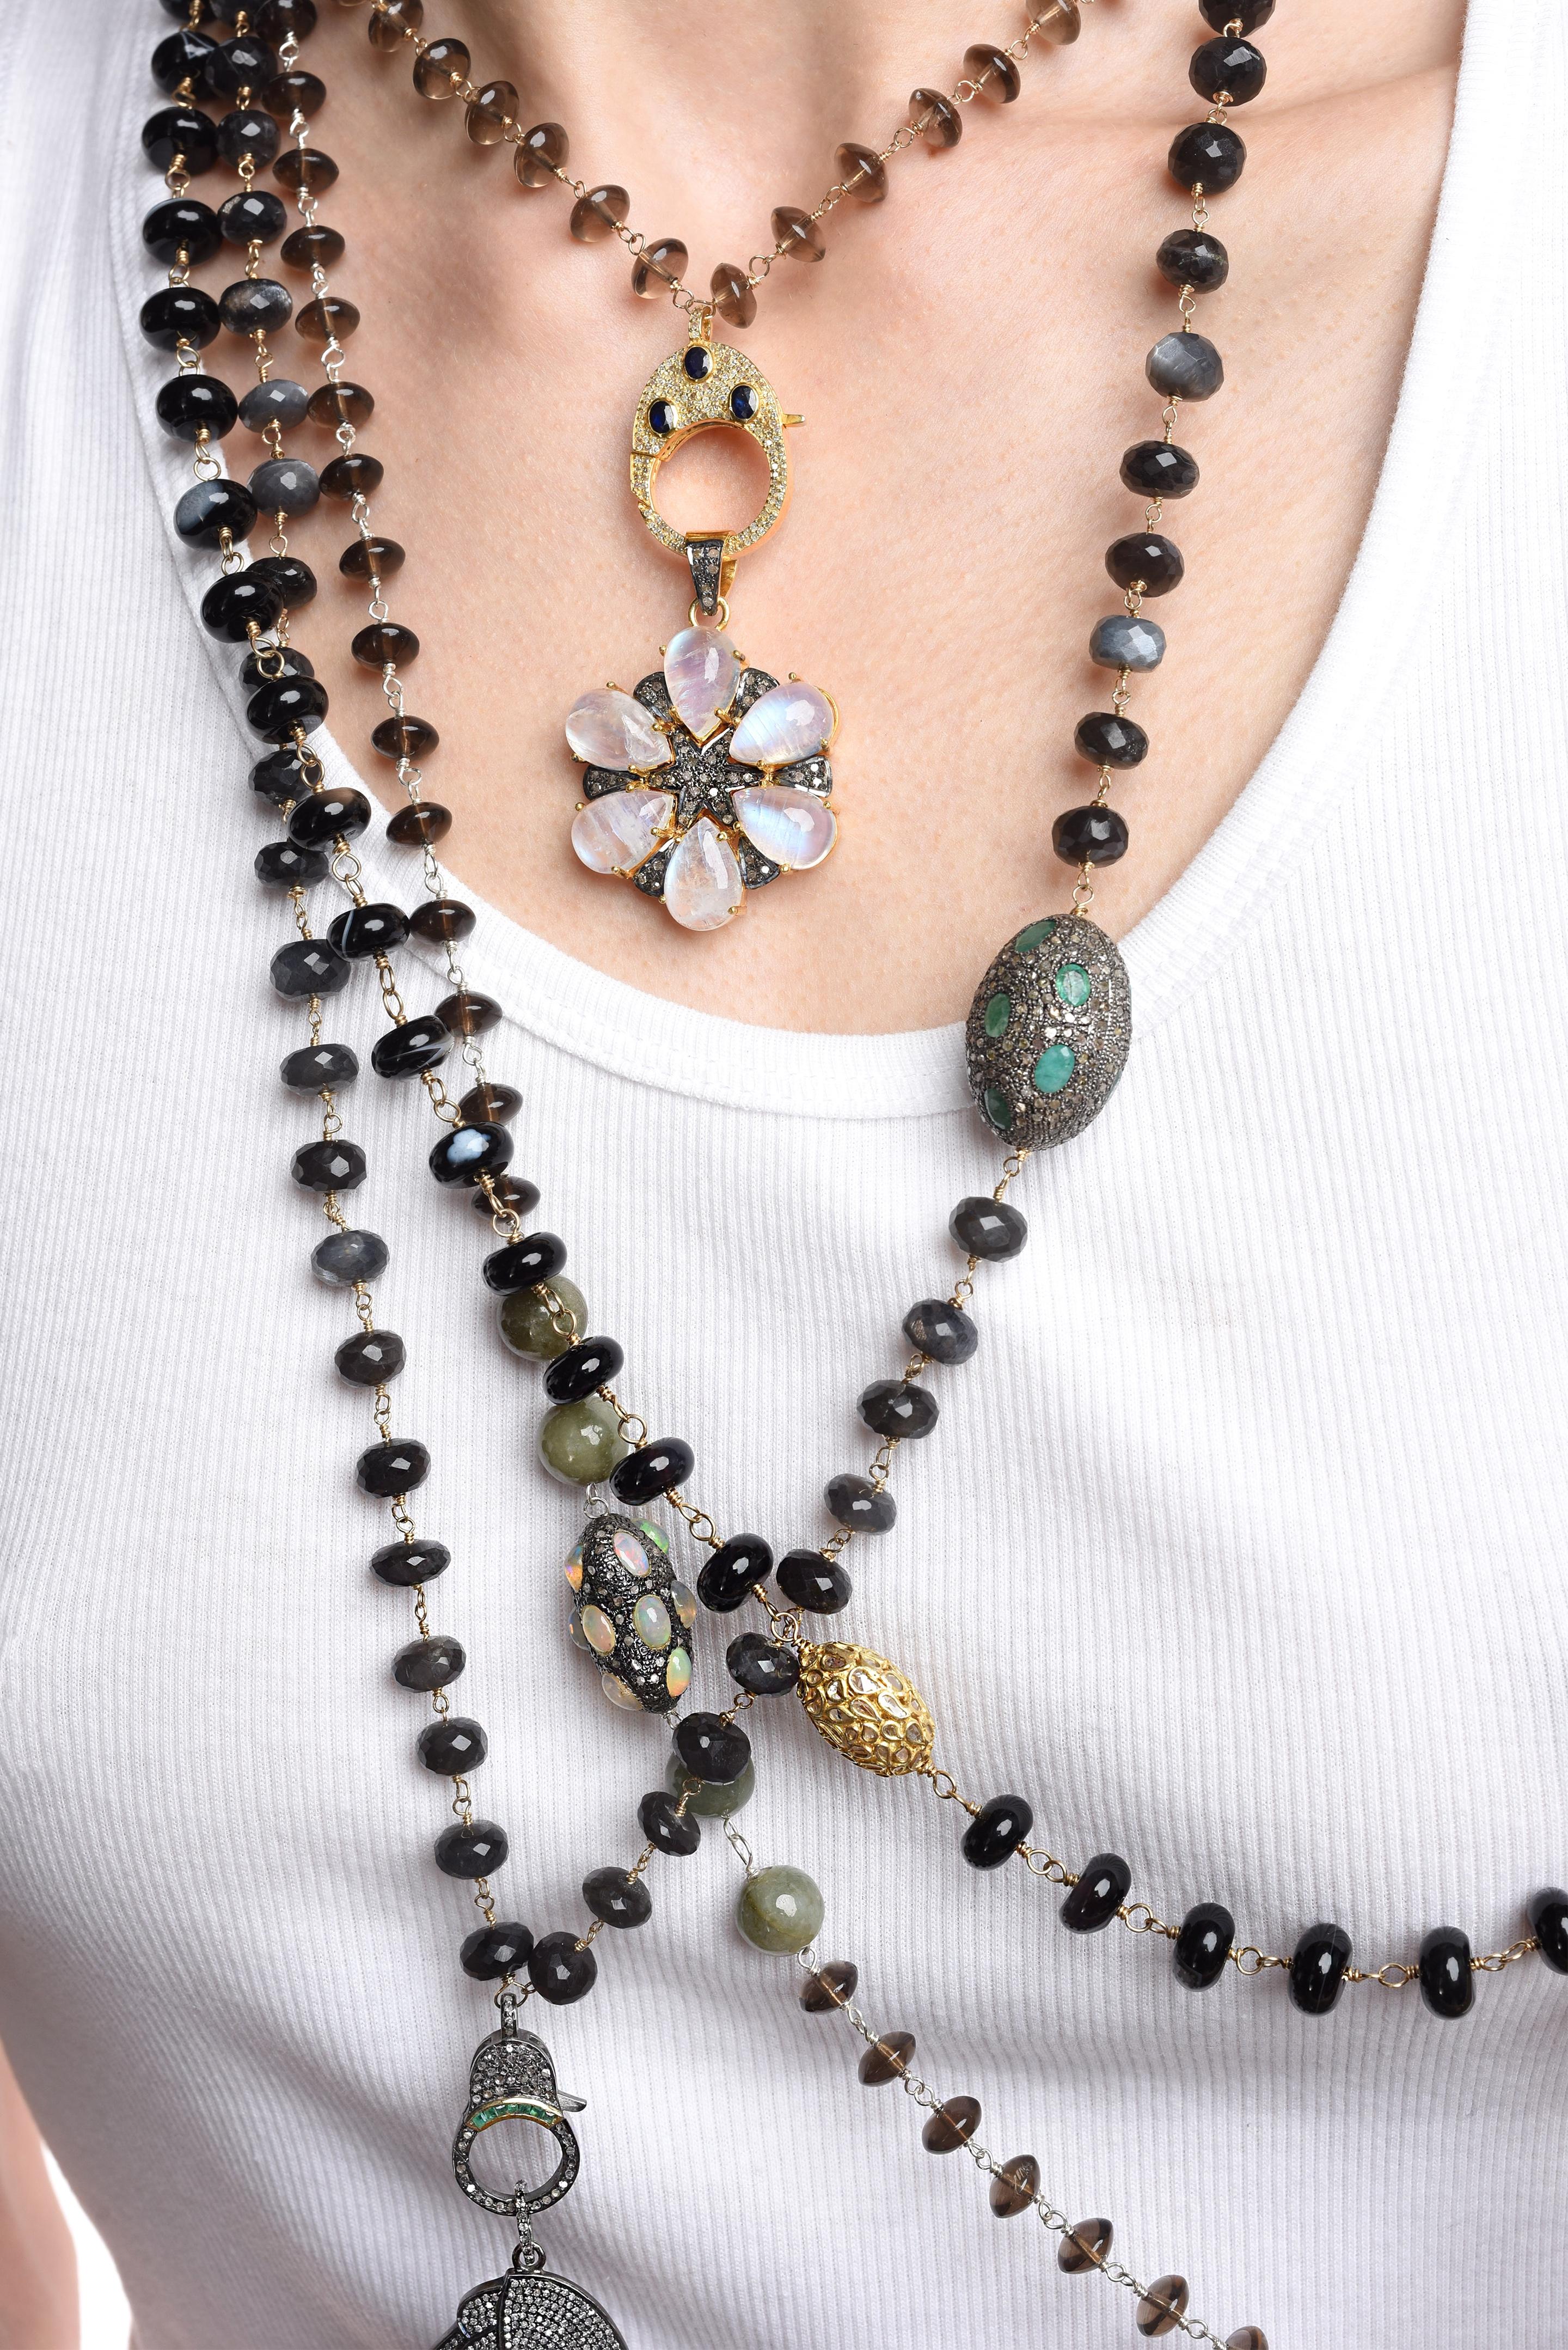 Beaded Rosary Necklace consists of:
- 37